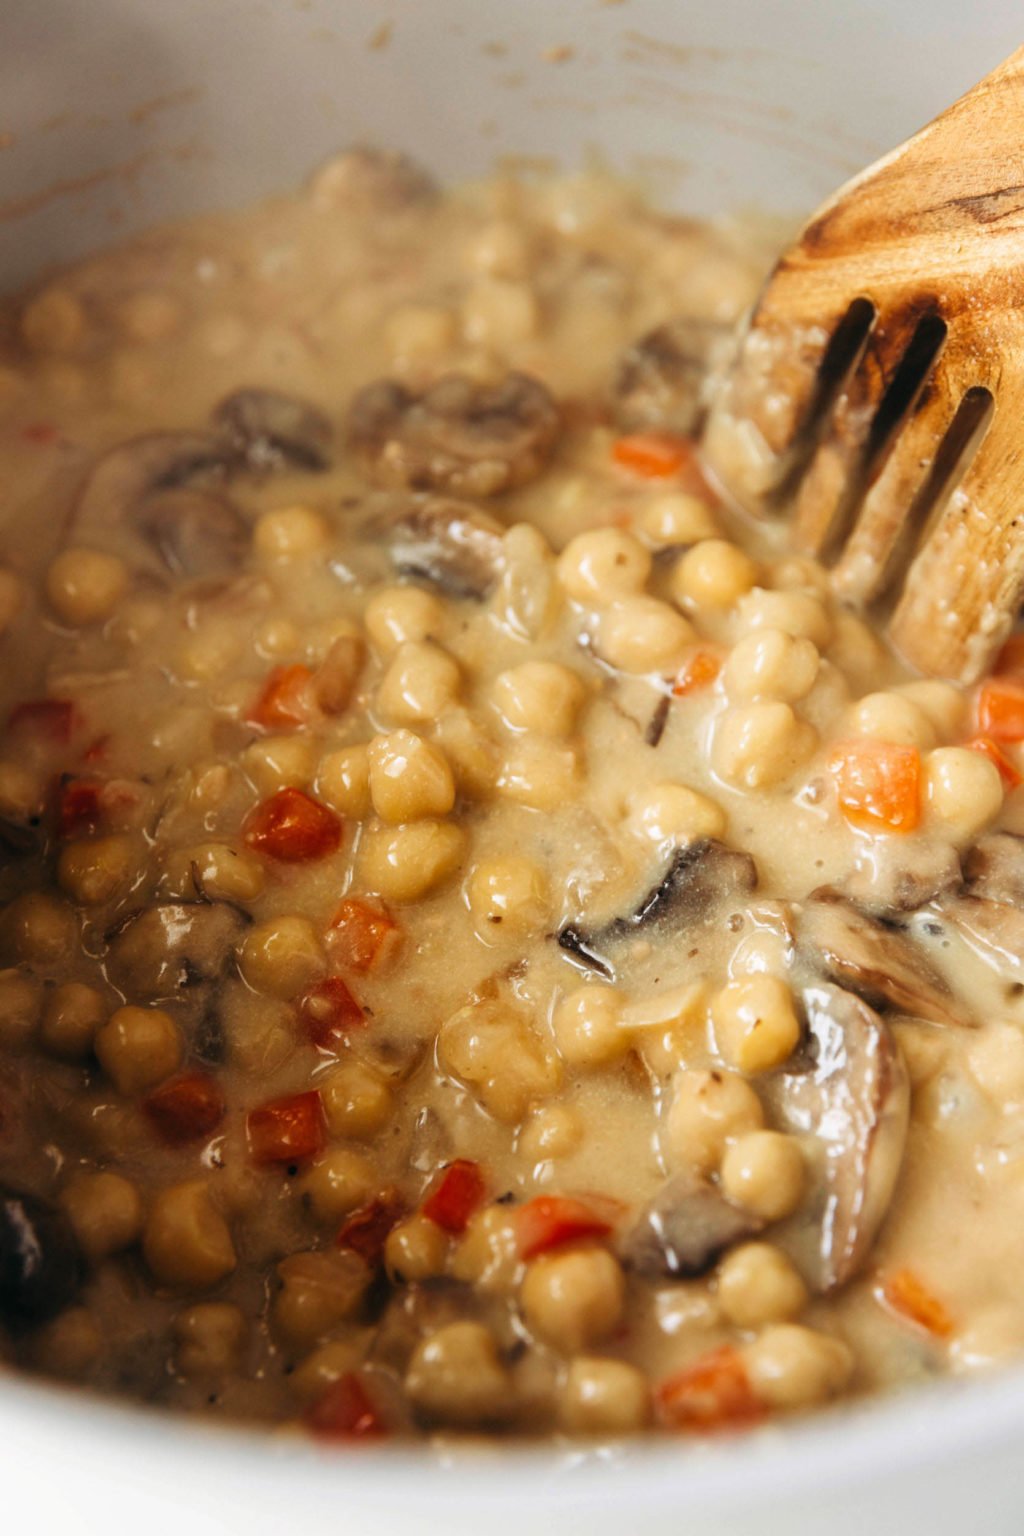 Chickpeas, mushrooms, and red peppers are simmering in liquid in a skillet.